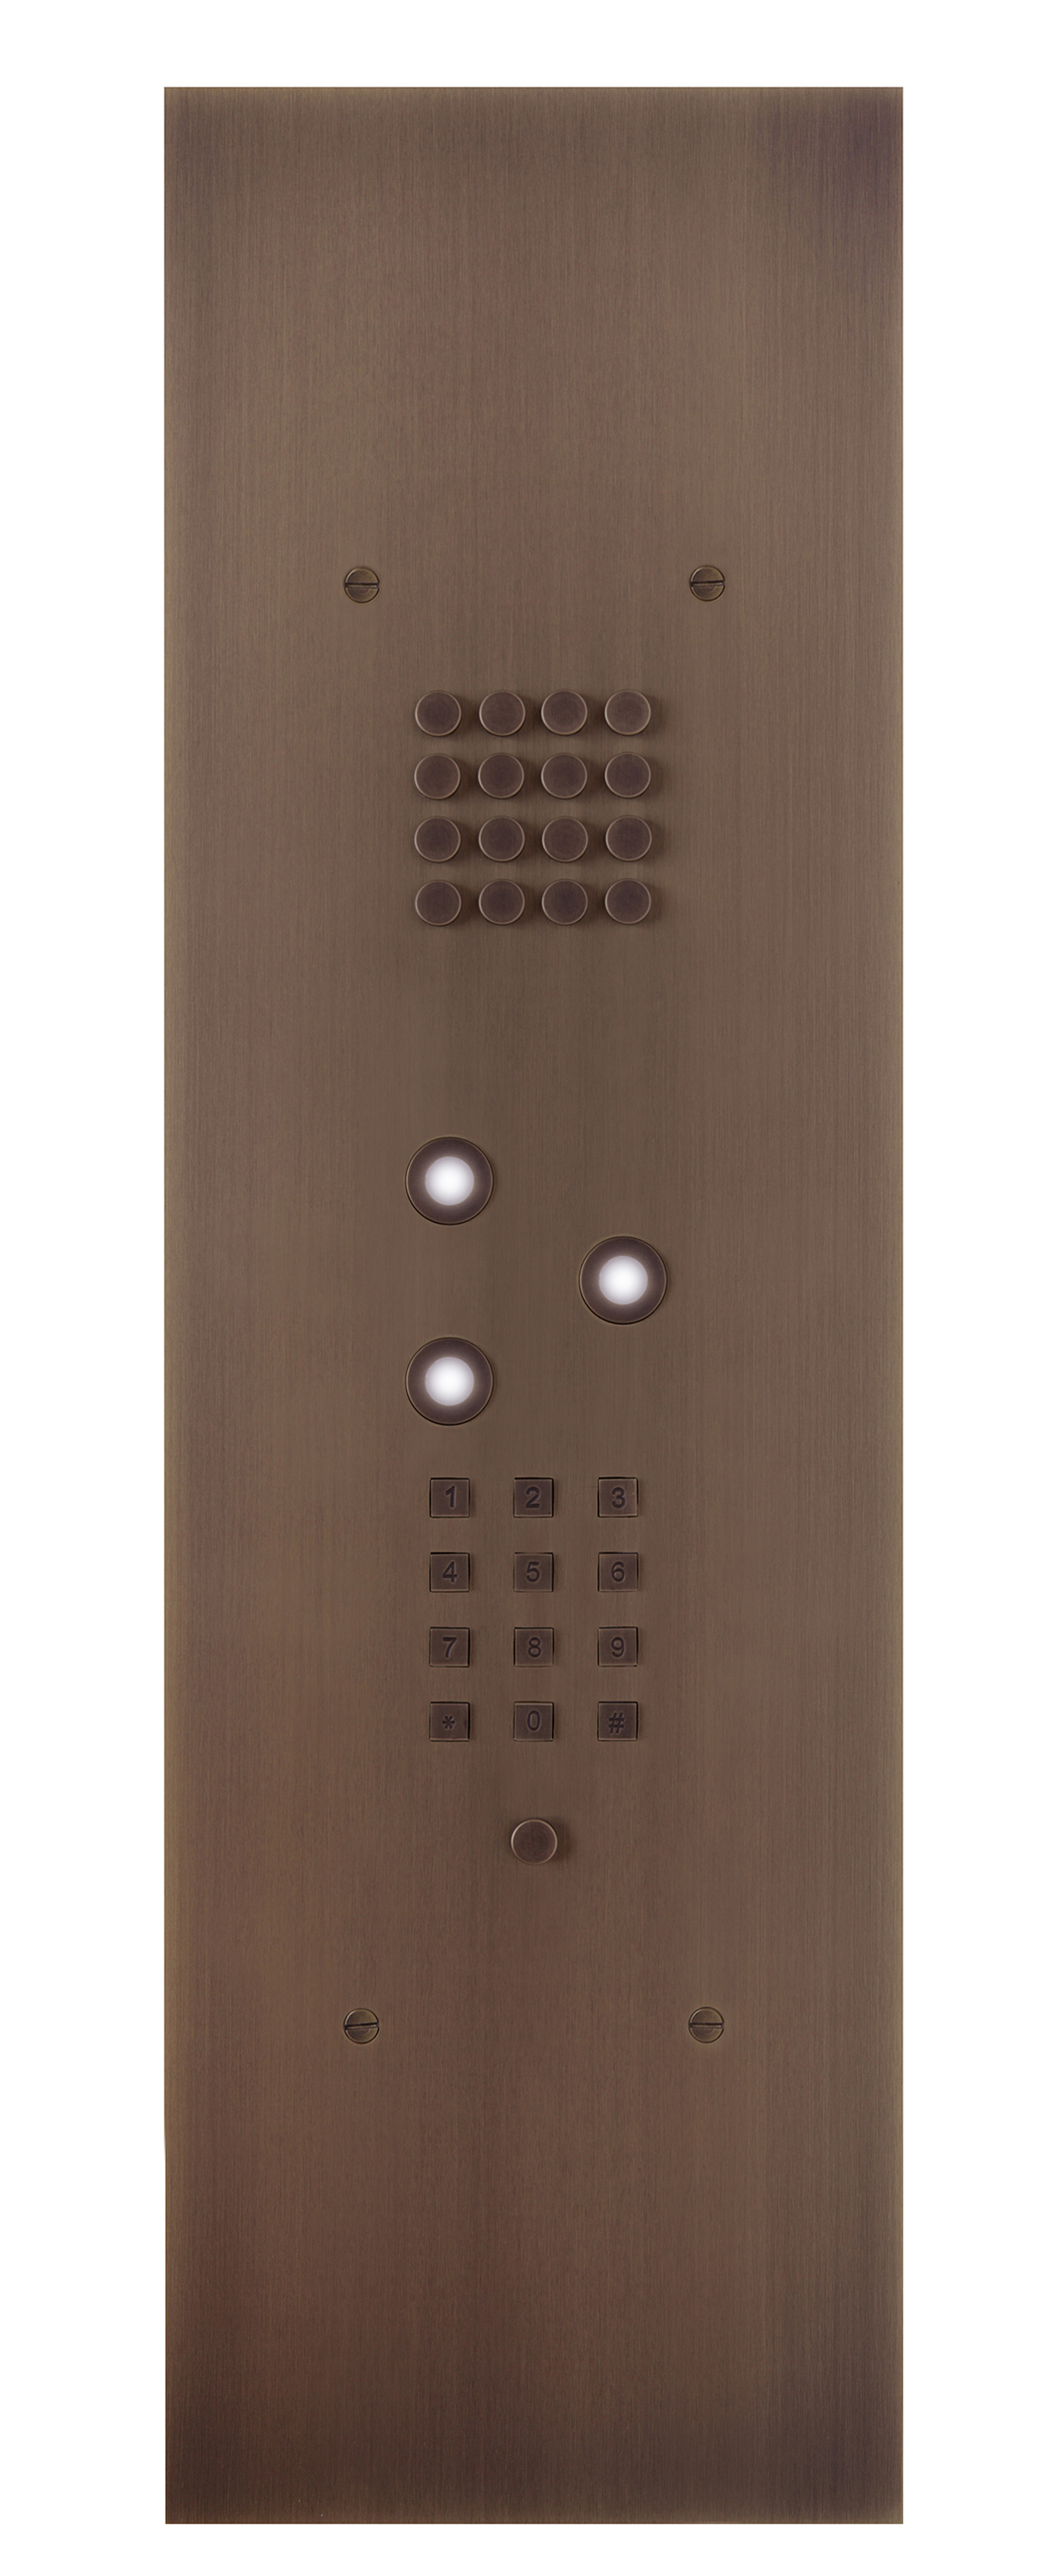 Wizard Bronze rustic IP 3 buttons large model with keypad